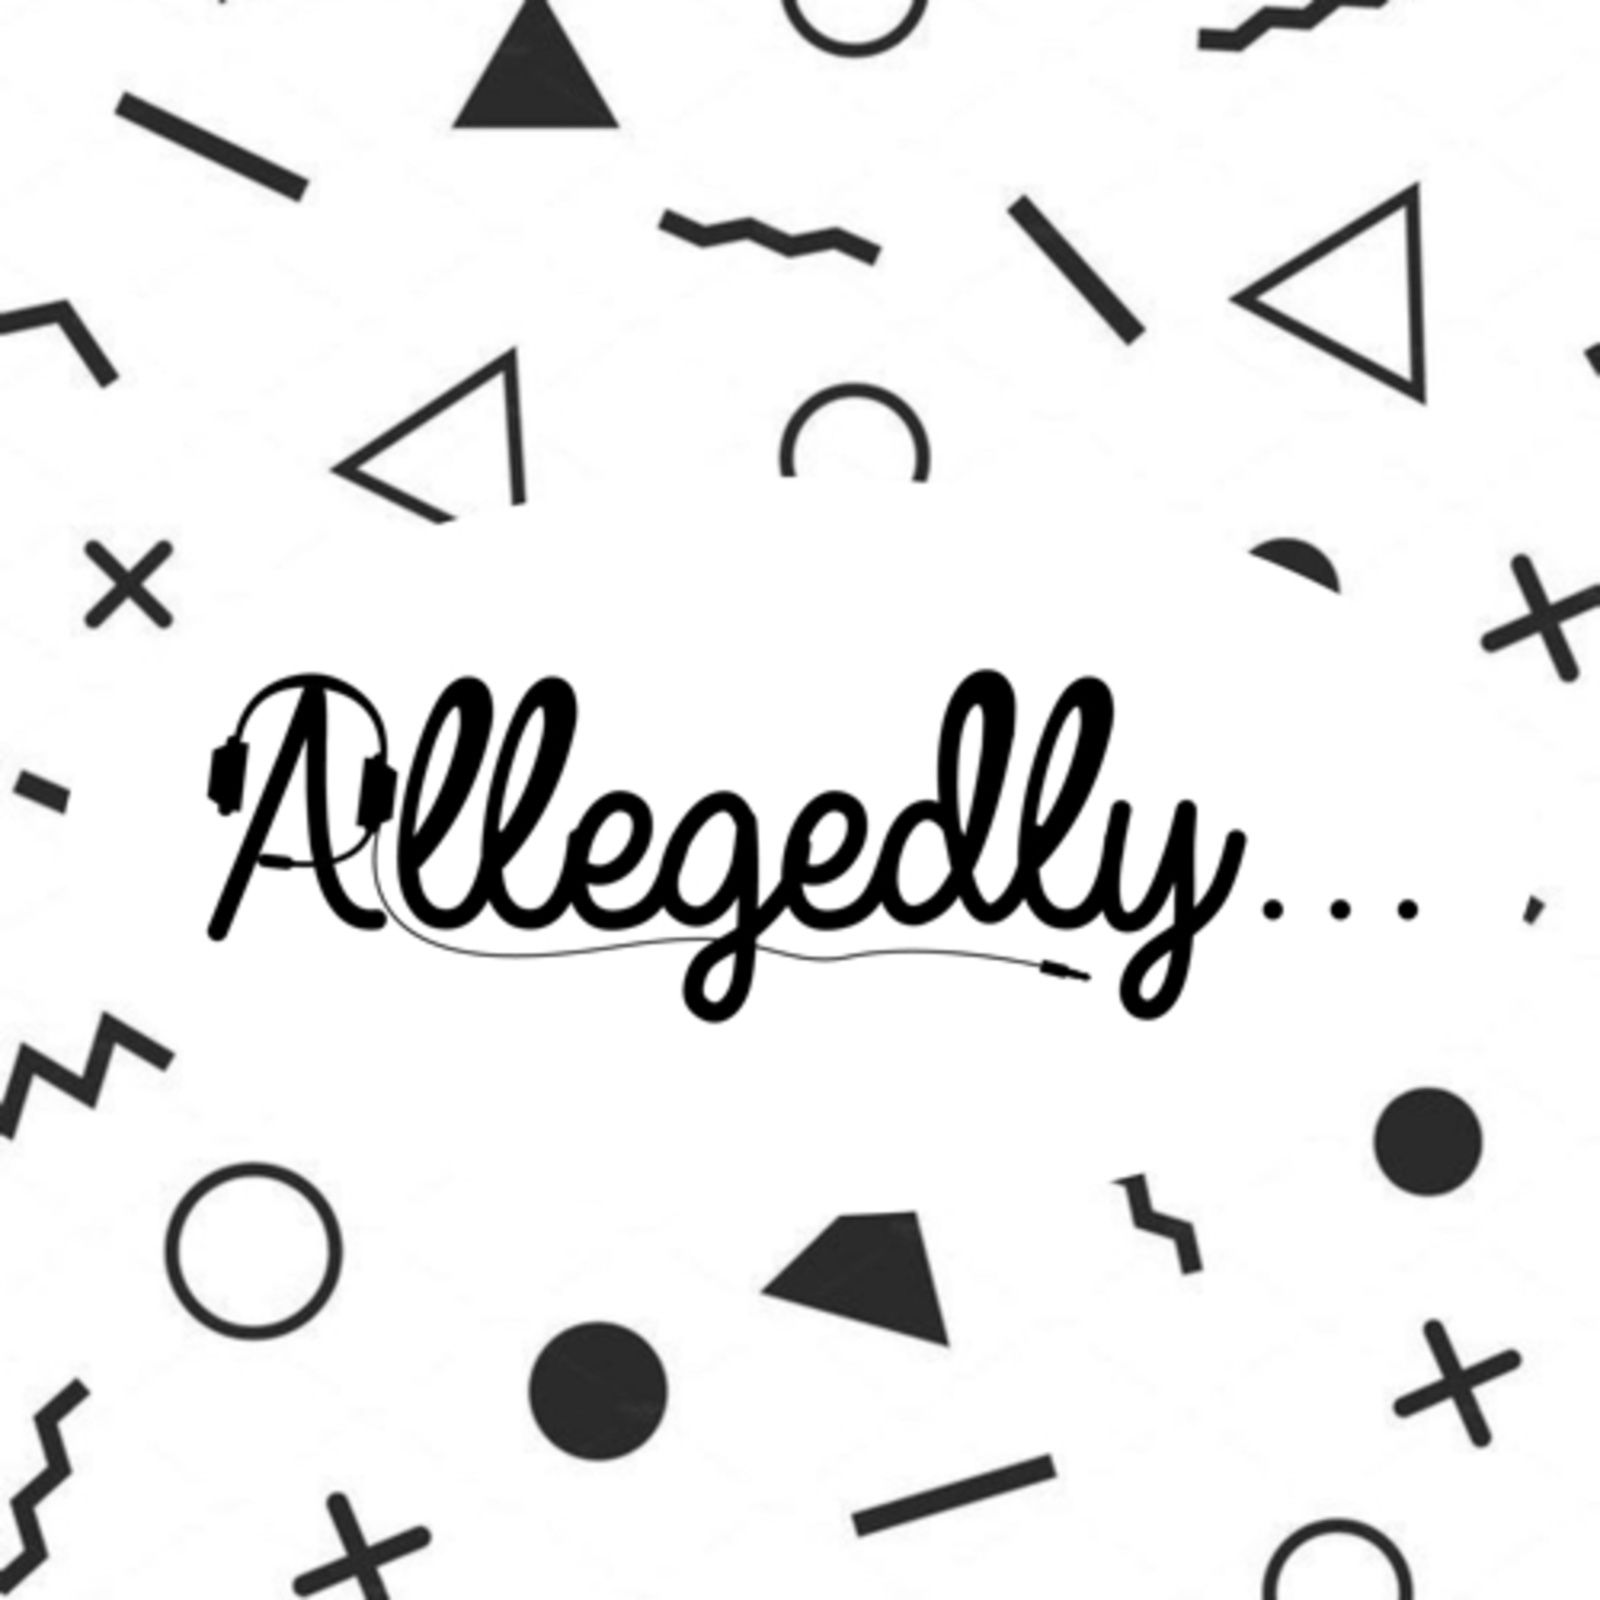 1: allegedly…we have a podcast